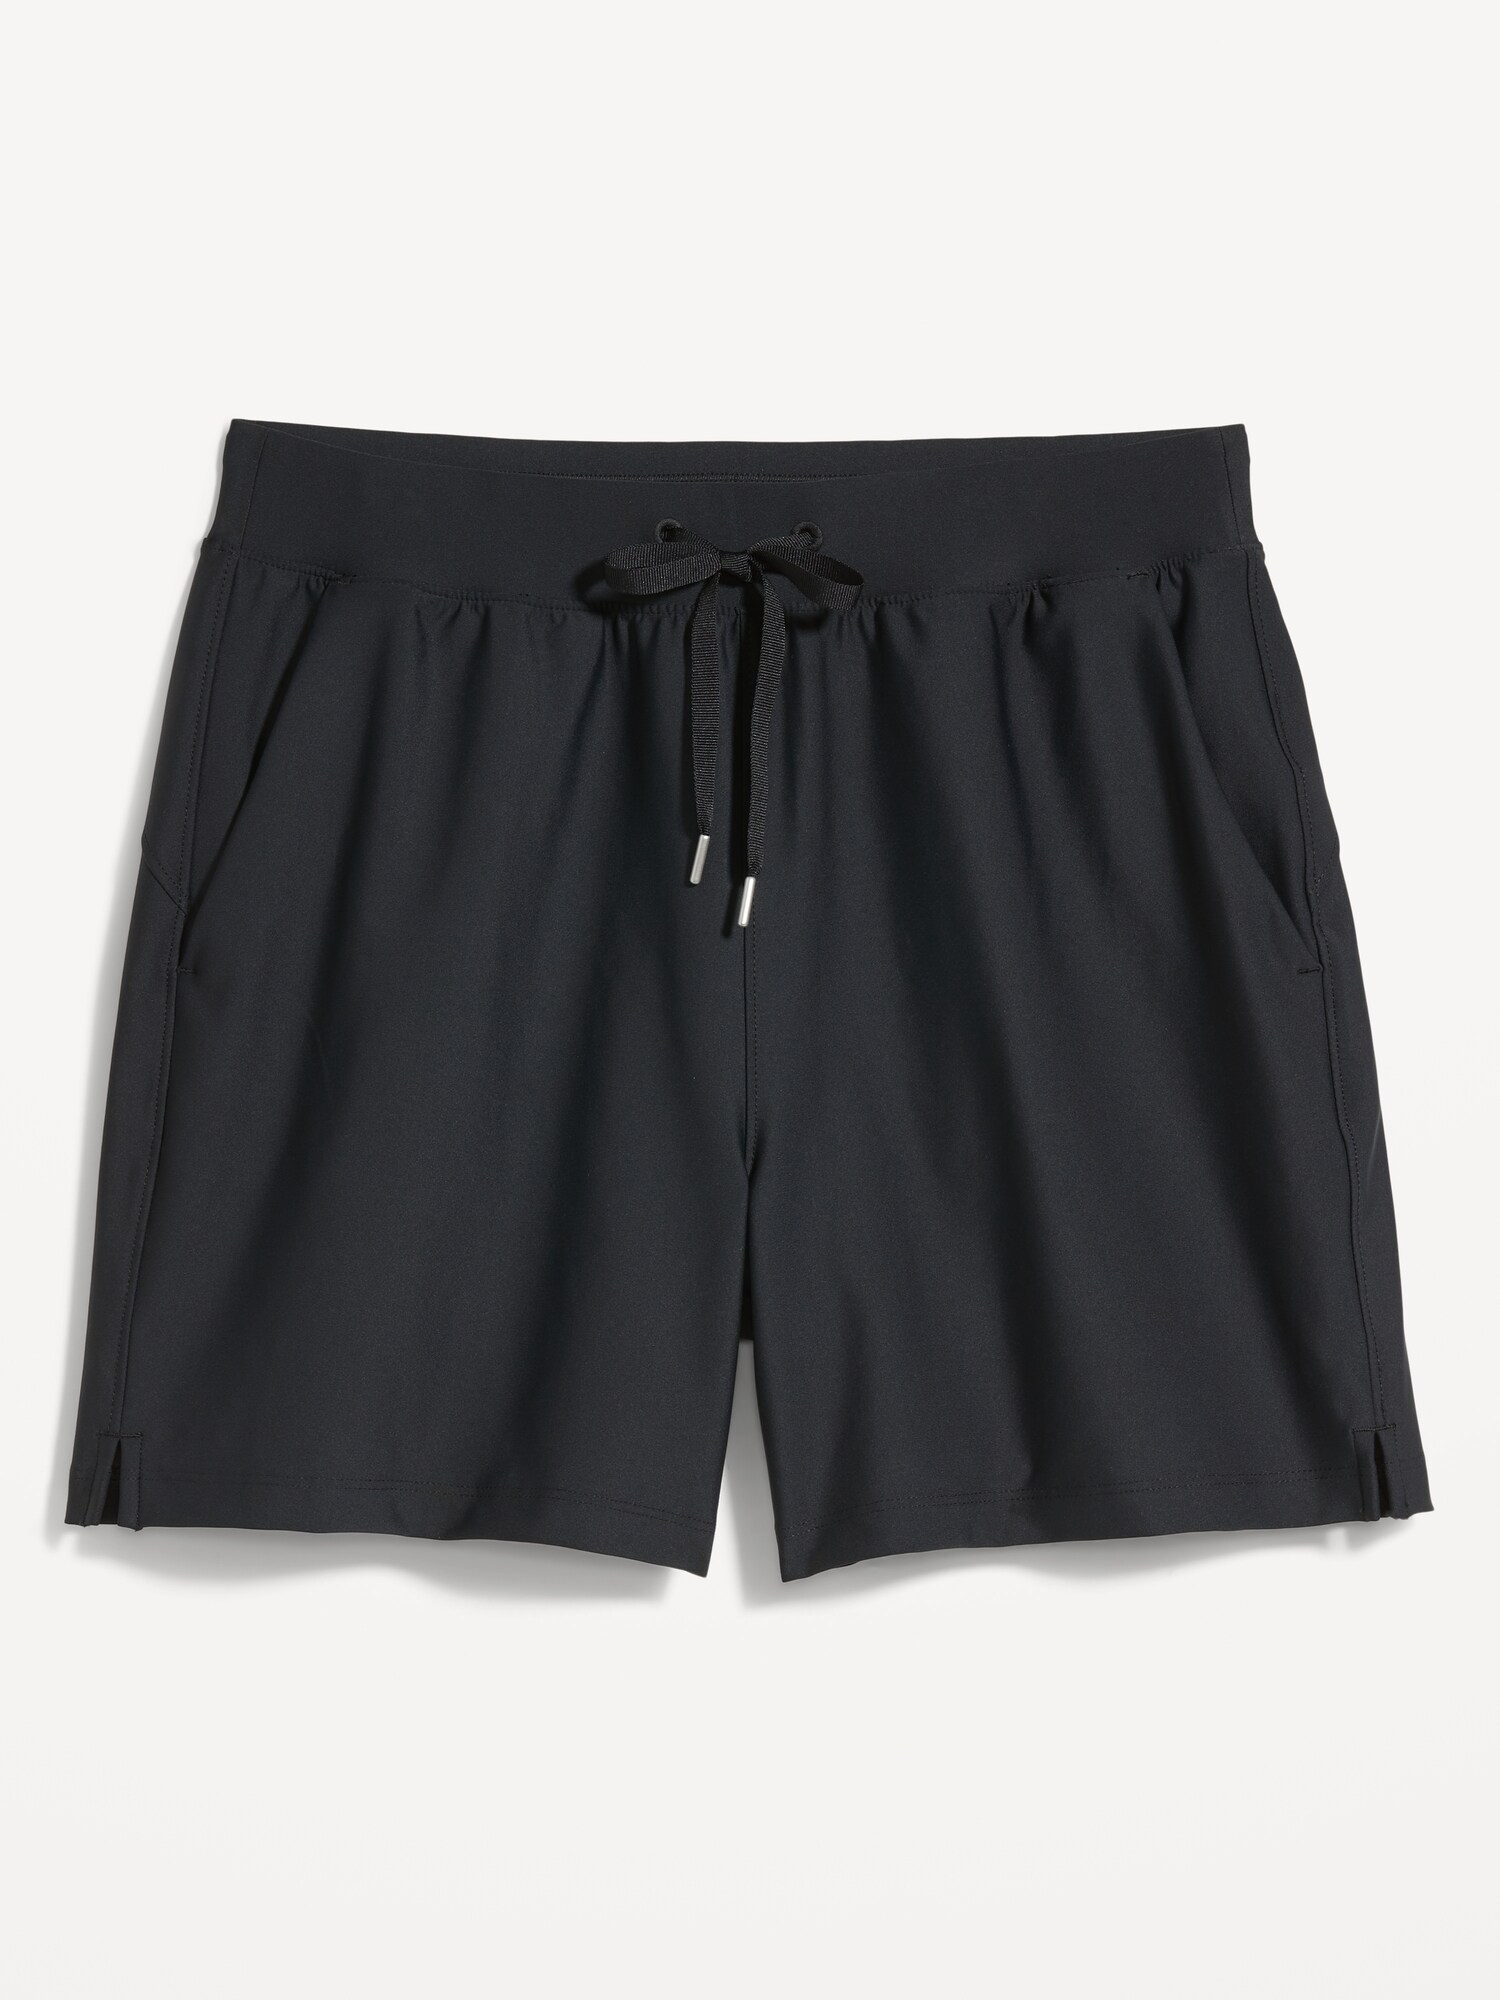 High-Waisted PowerSoft Shorts -- 5-inch inseam